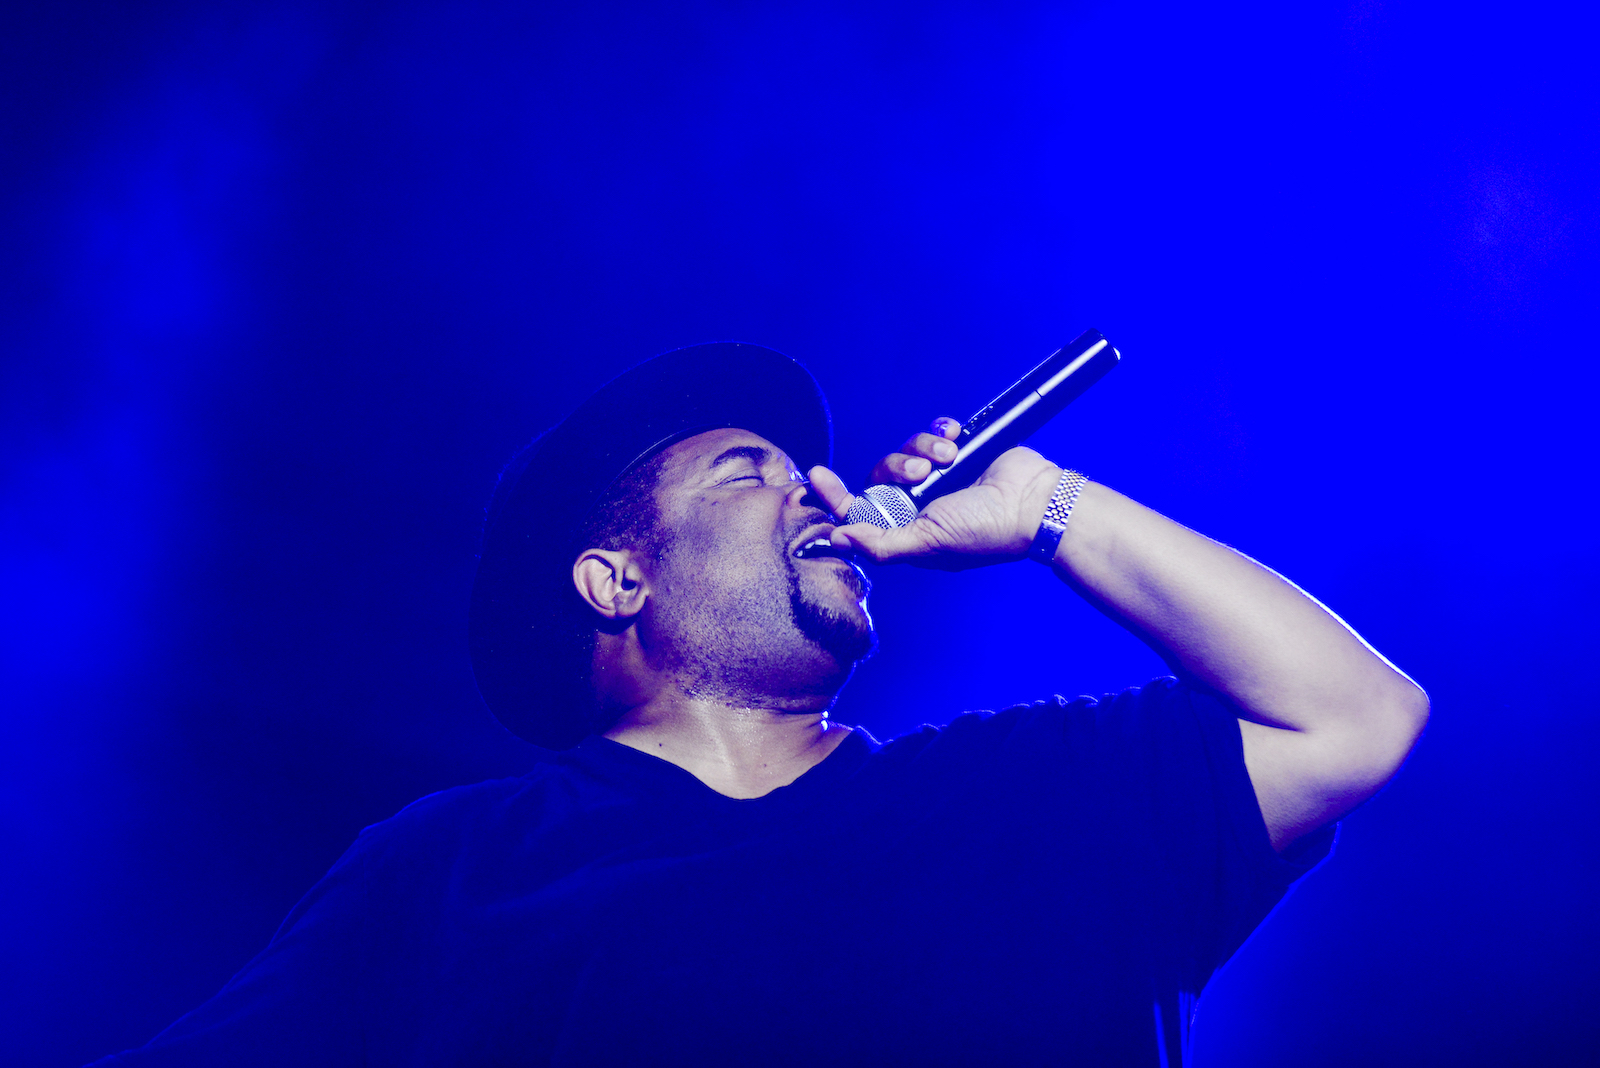 Sir Mix-A-Lot performed on stage and holds a microphone